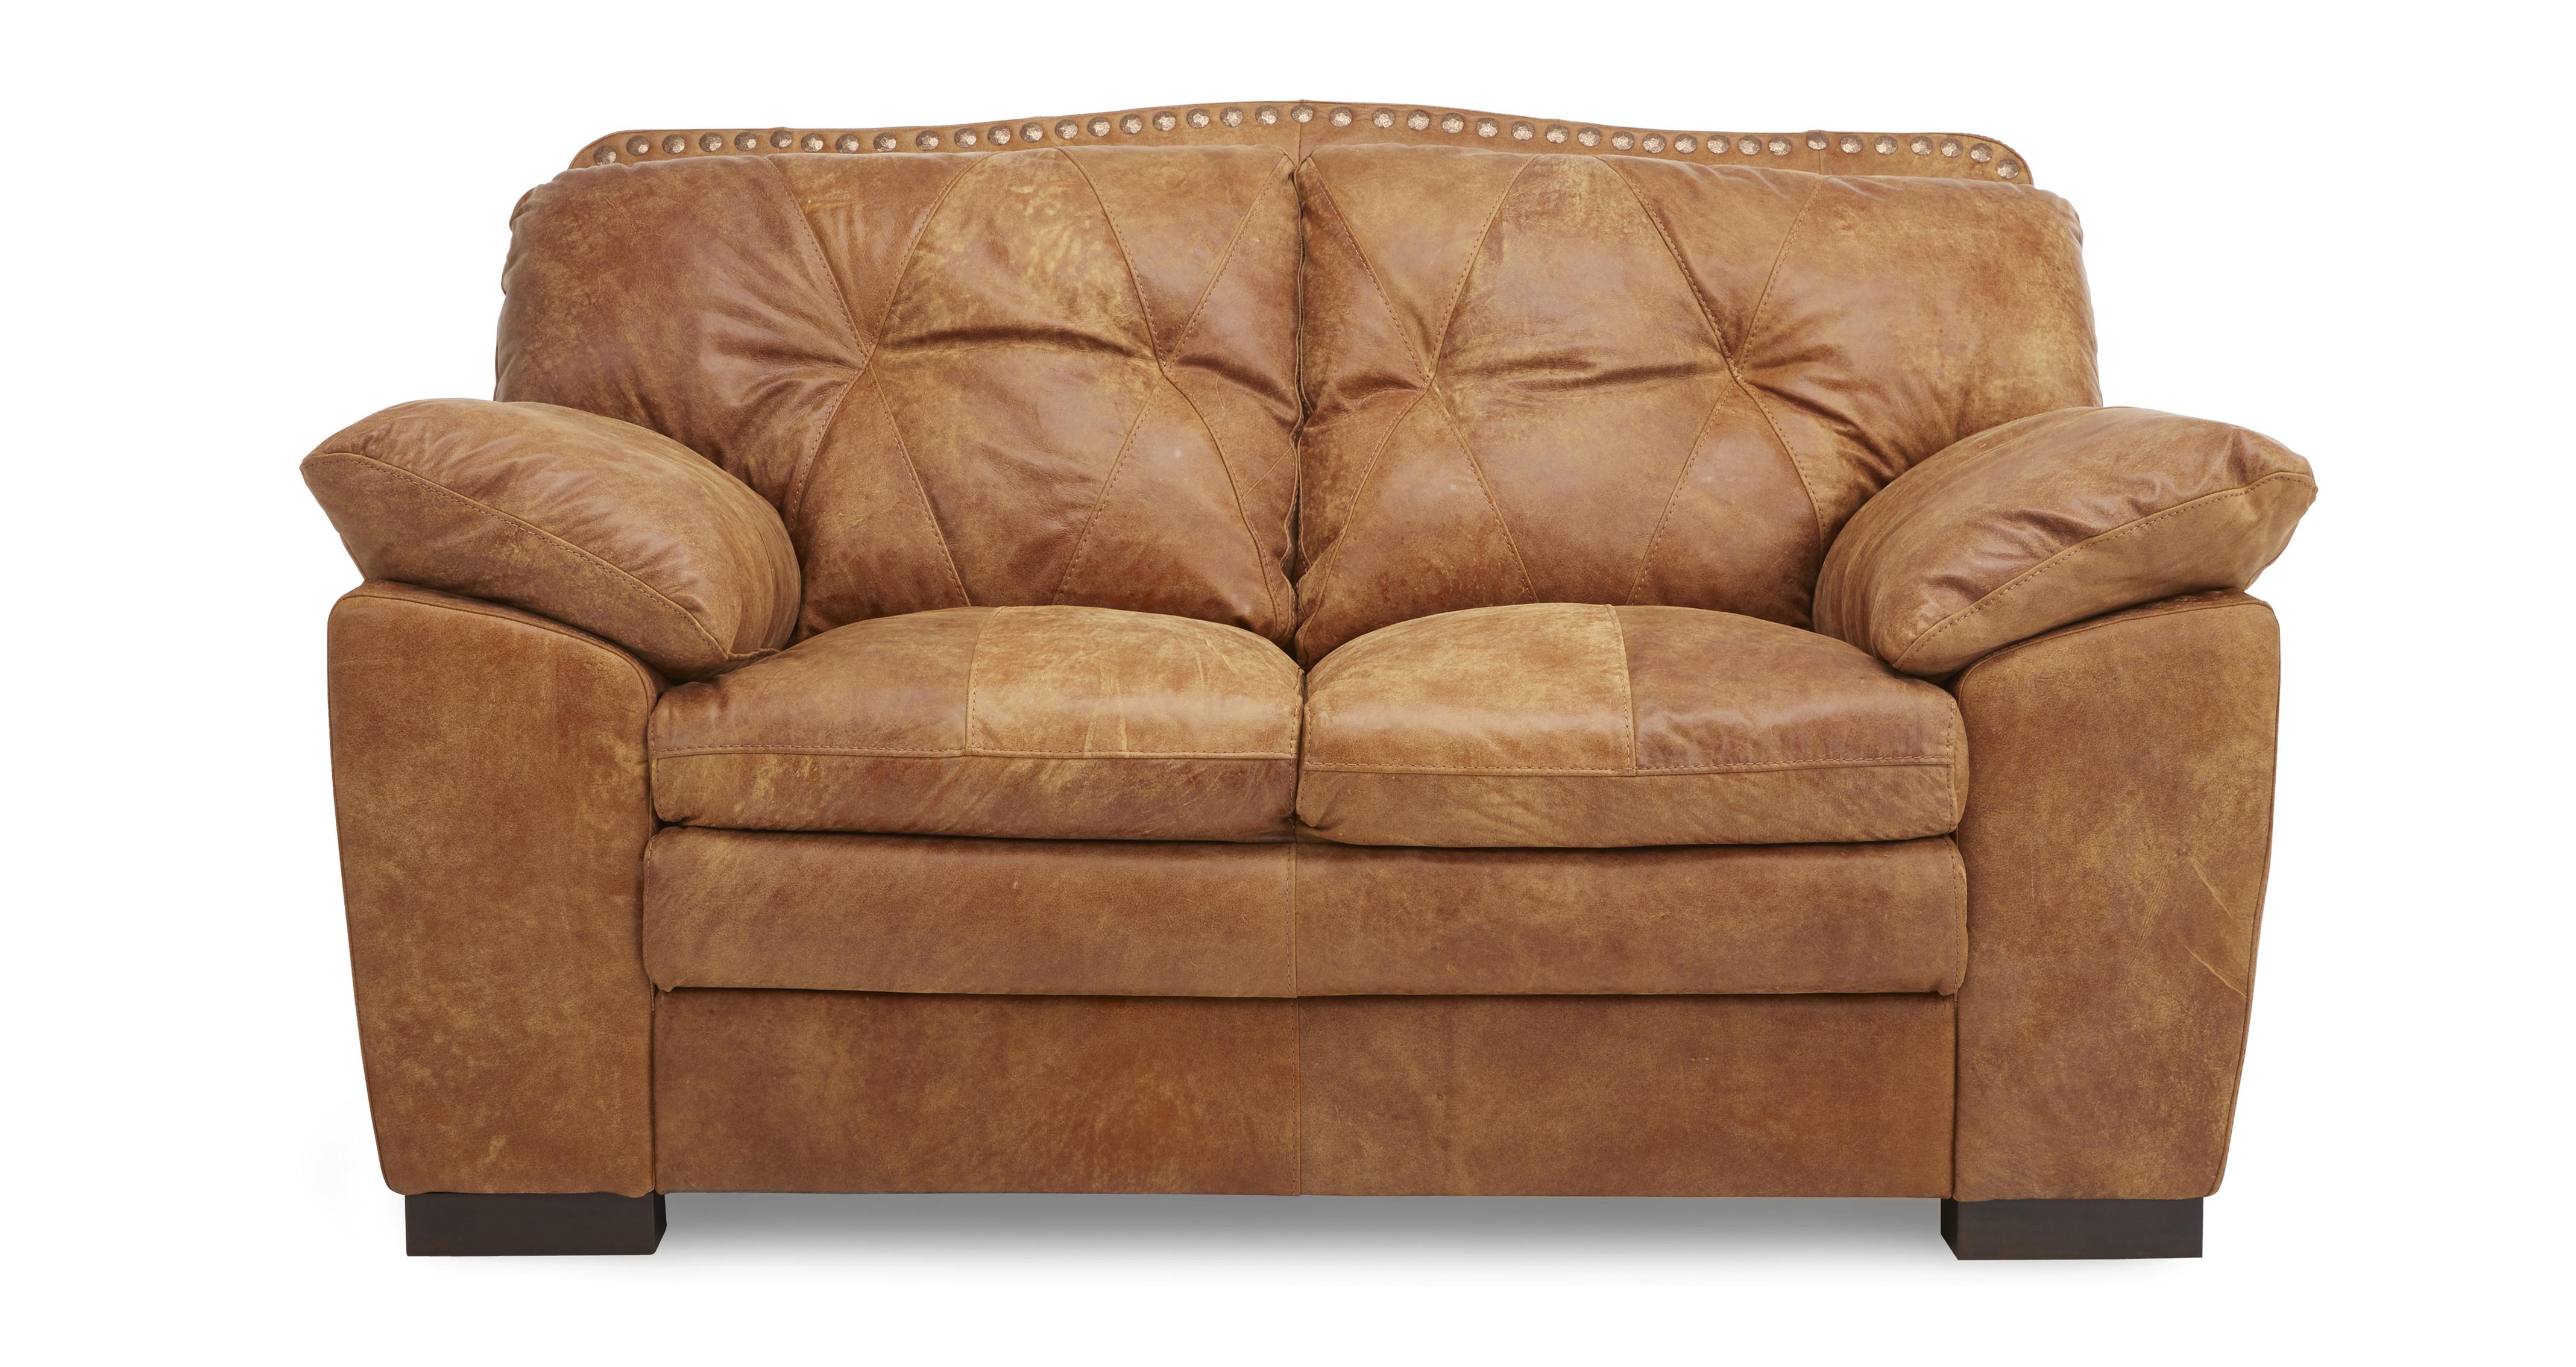 dfs 2 seater leather sofa bed